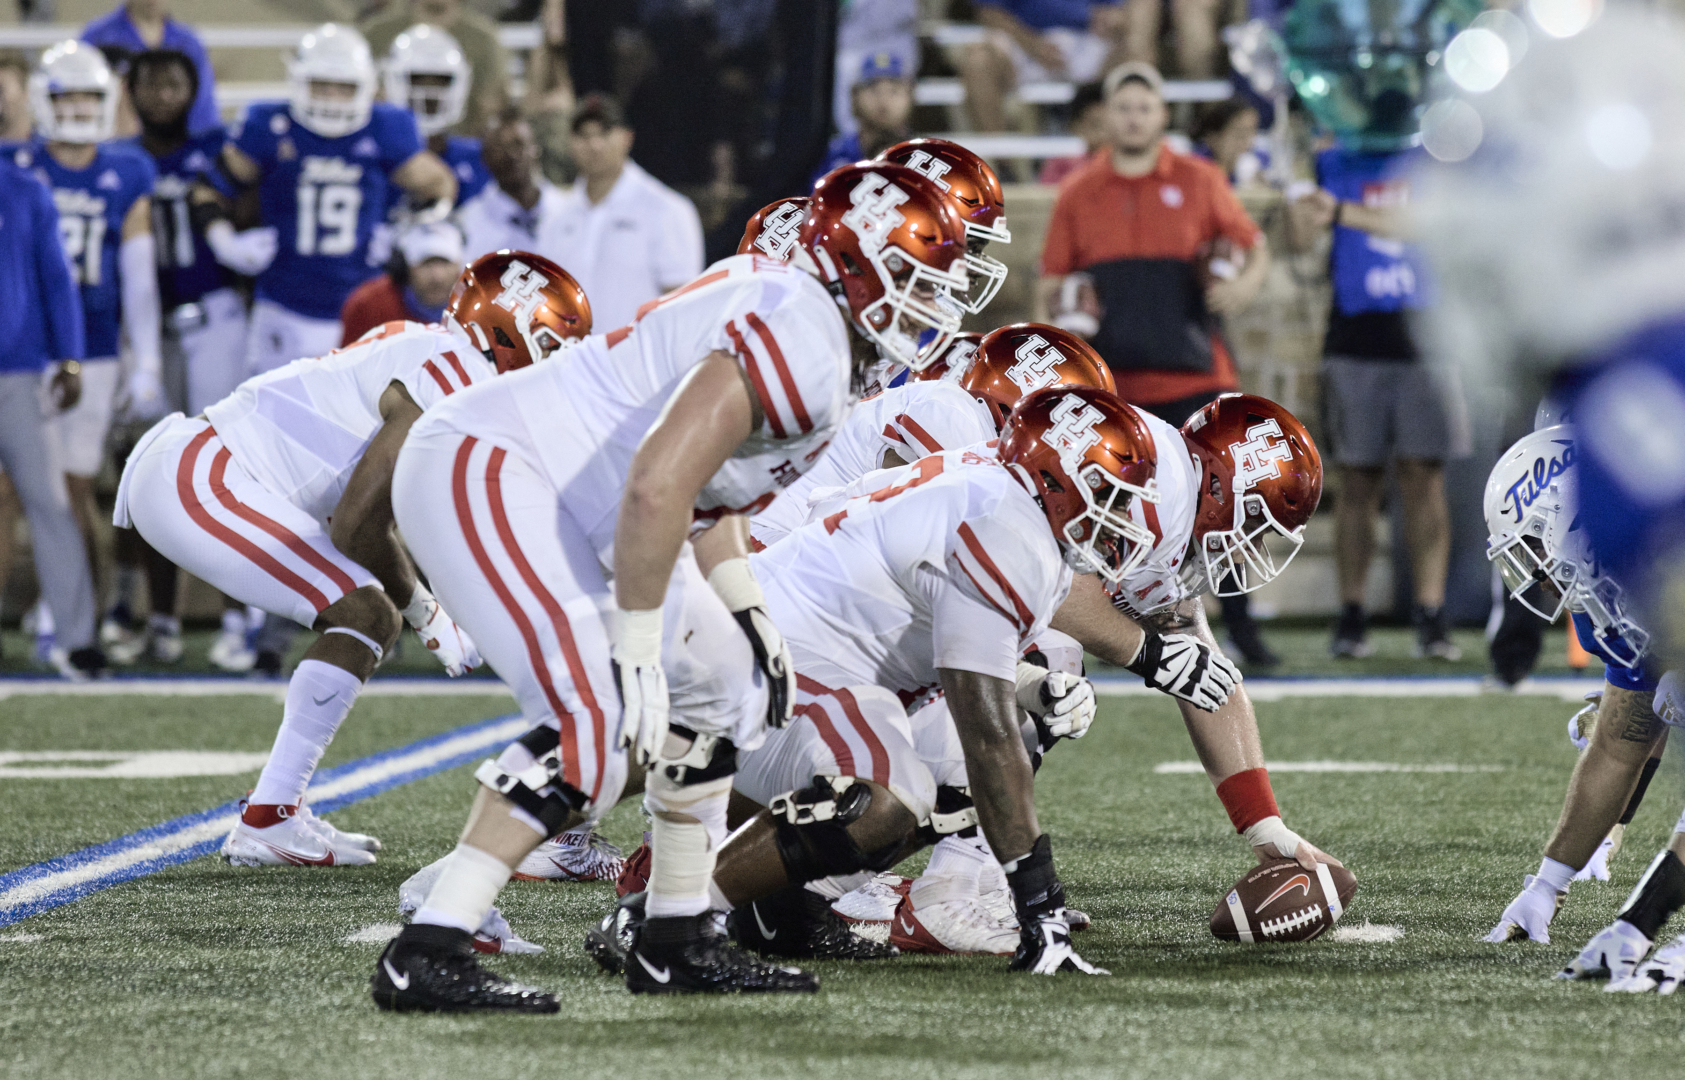 UH football looks to remain undefeated in AAC play as they prepare to take on Tulane Thursday night. | Courtesy of UH athletics